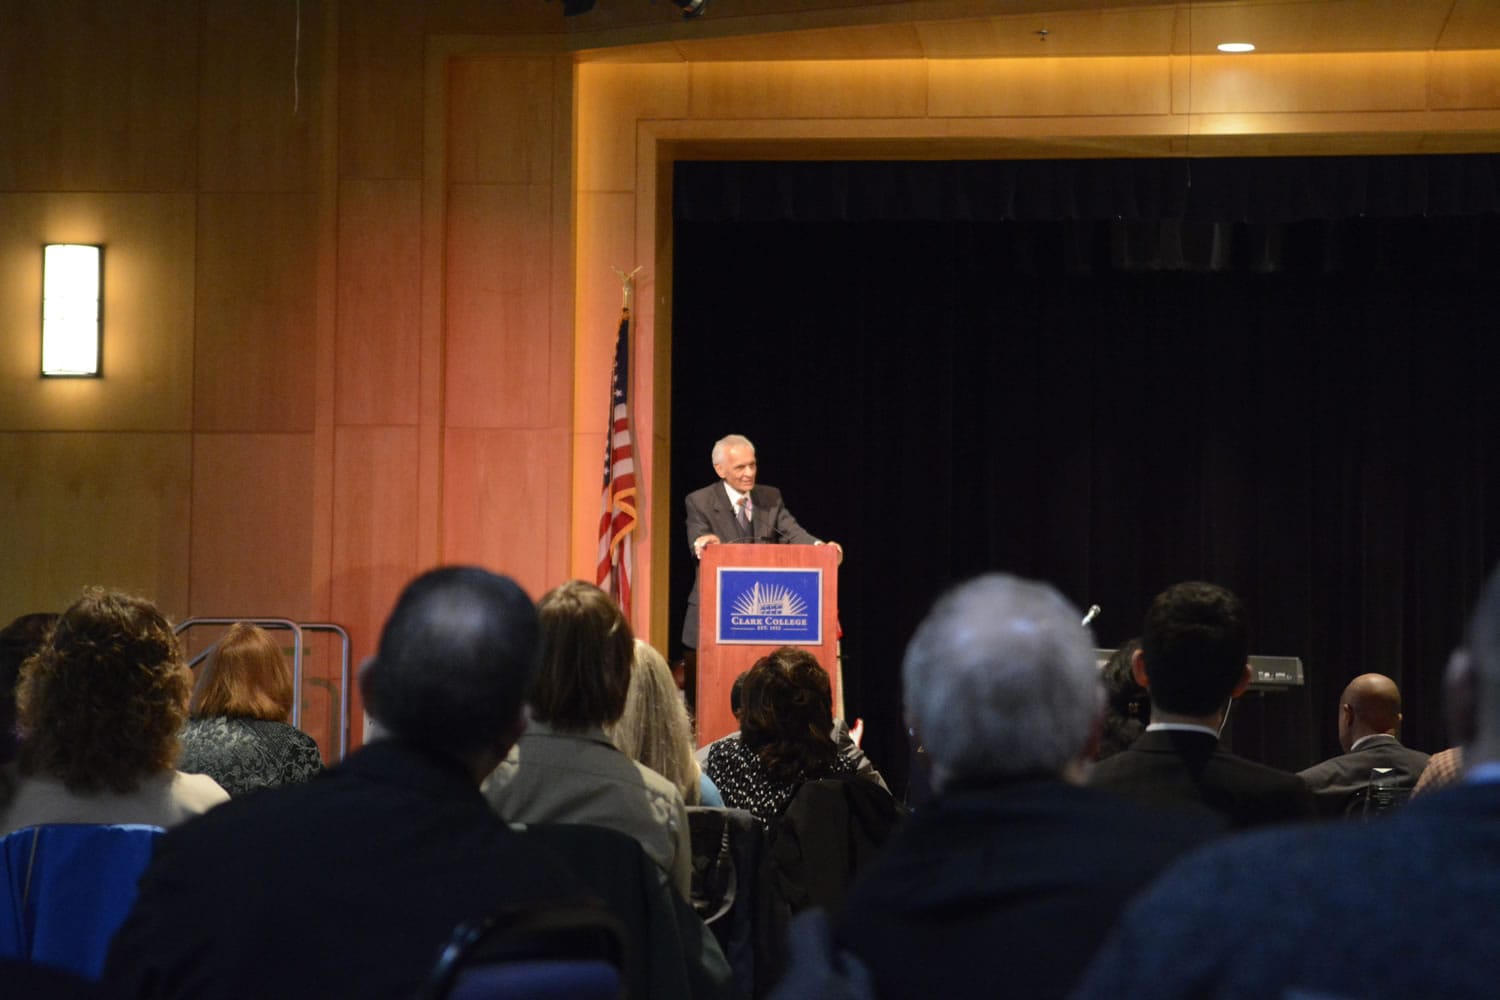 C.T. Vivian, a prominent figure in the civil rights movement, spoke Saturday at the sixth annual Martin Luther King Jr. Breakfast at Clark College.